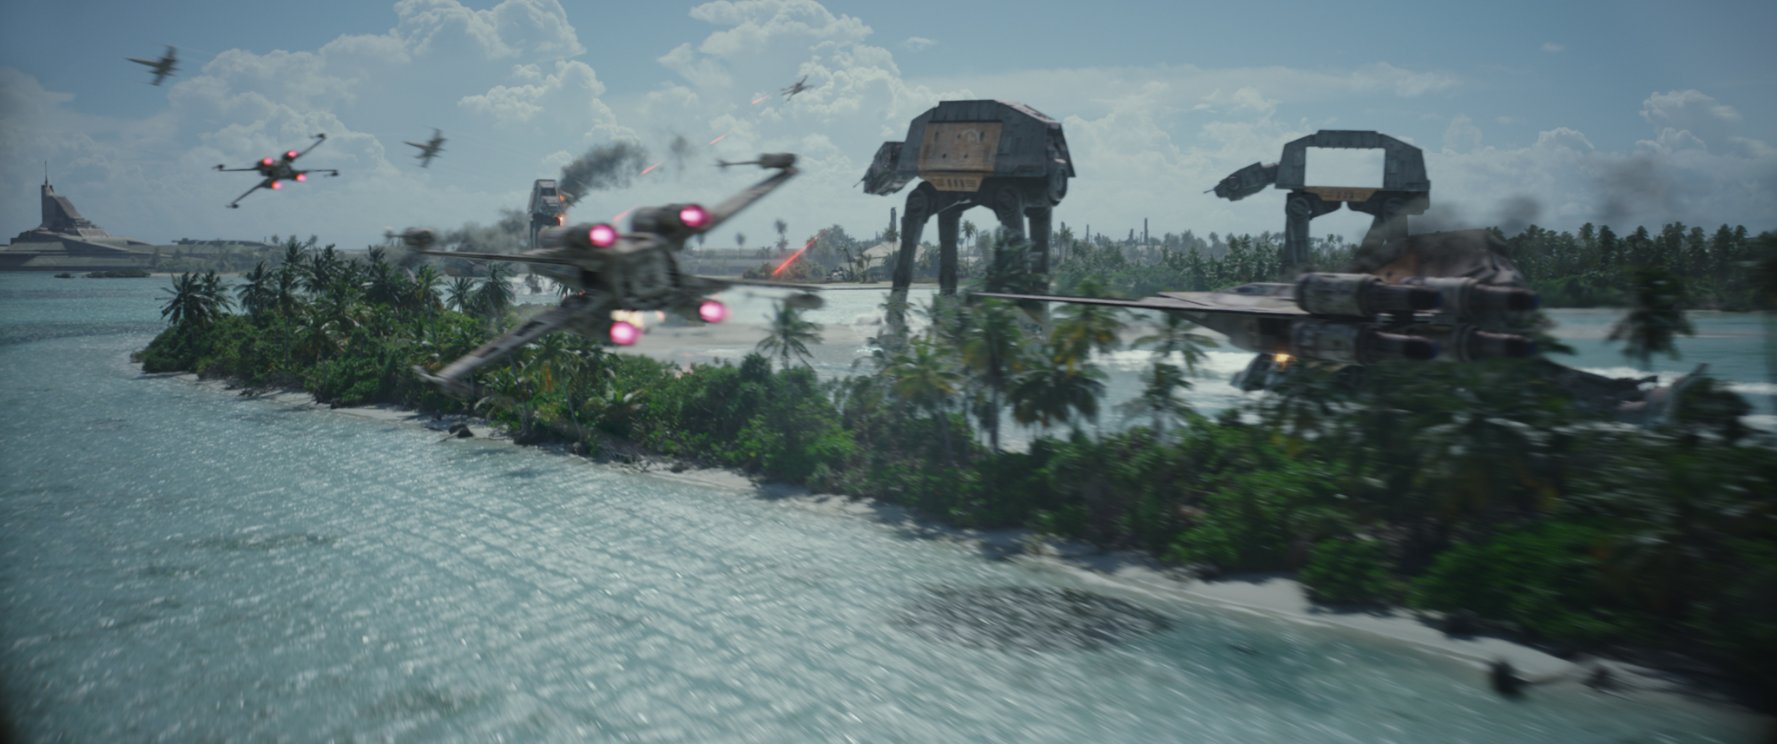 [CRITIQUE] ROGUE ONE: A STAR WARS STORY